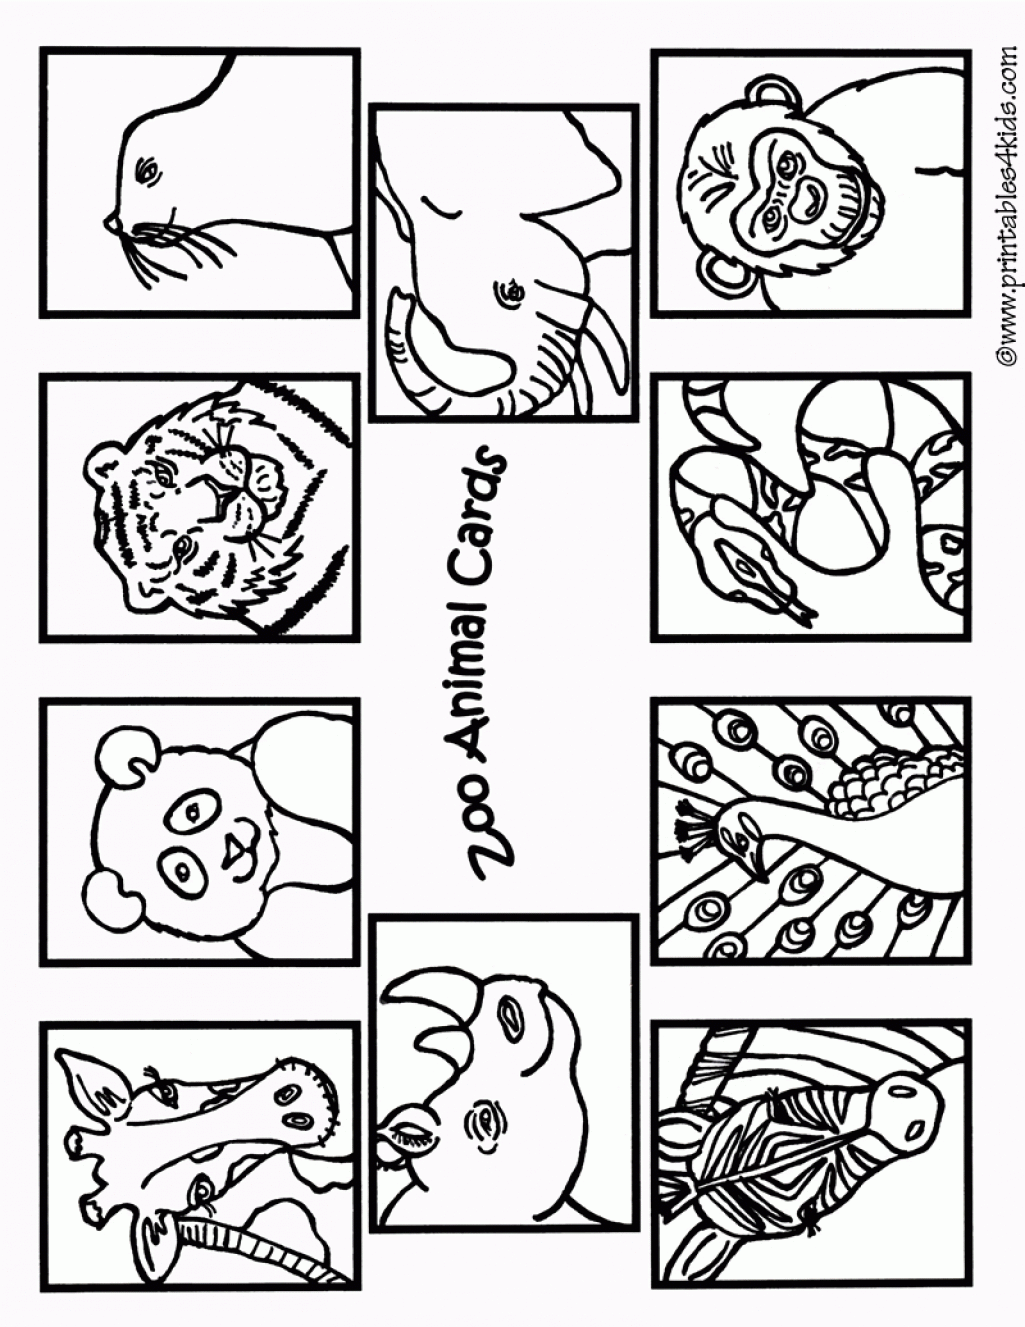 Zoo Animals Free Printable Coloring Pages